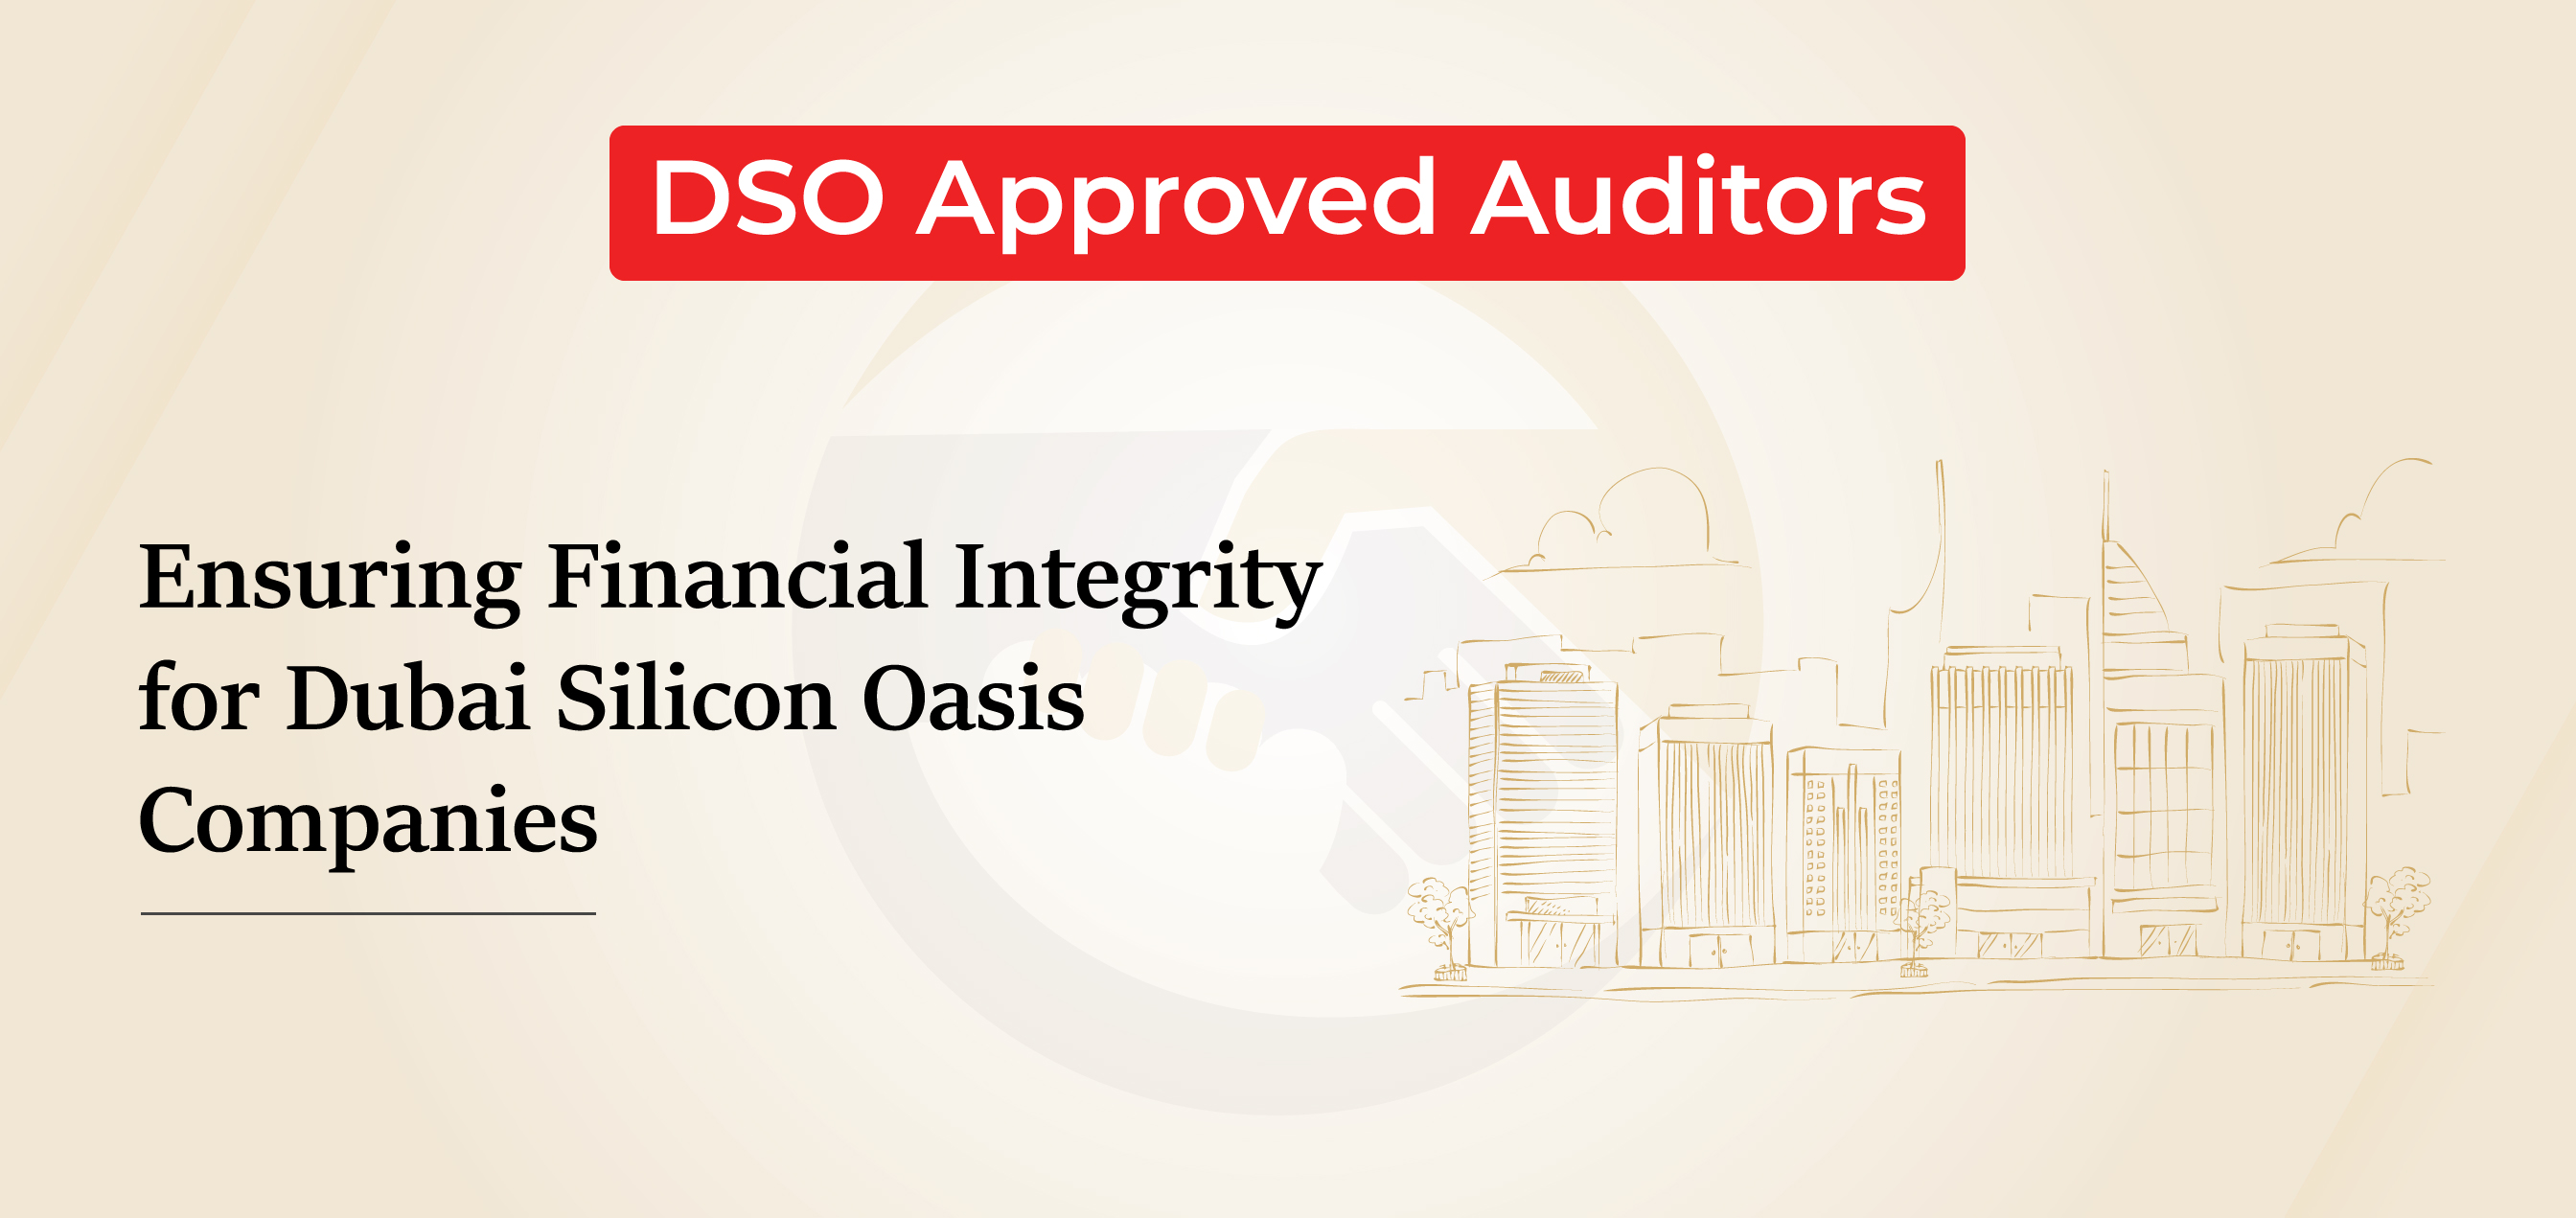 DSO Approved Auditors: Ensuring Financial Integrity for Dubai Silicon Oasis Companies